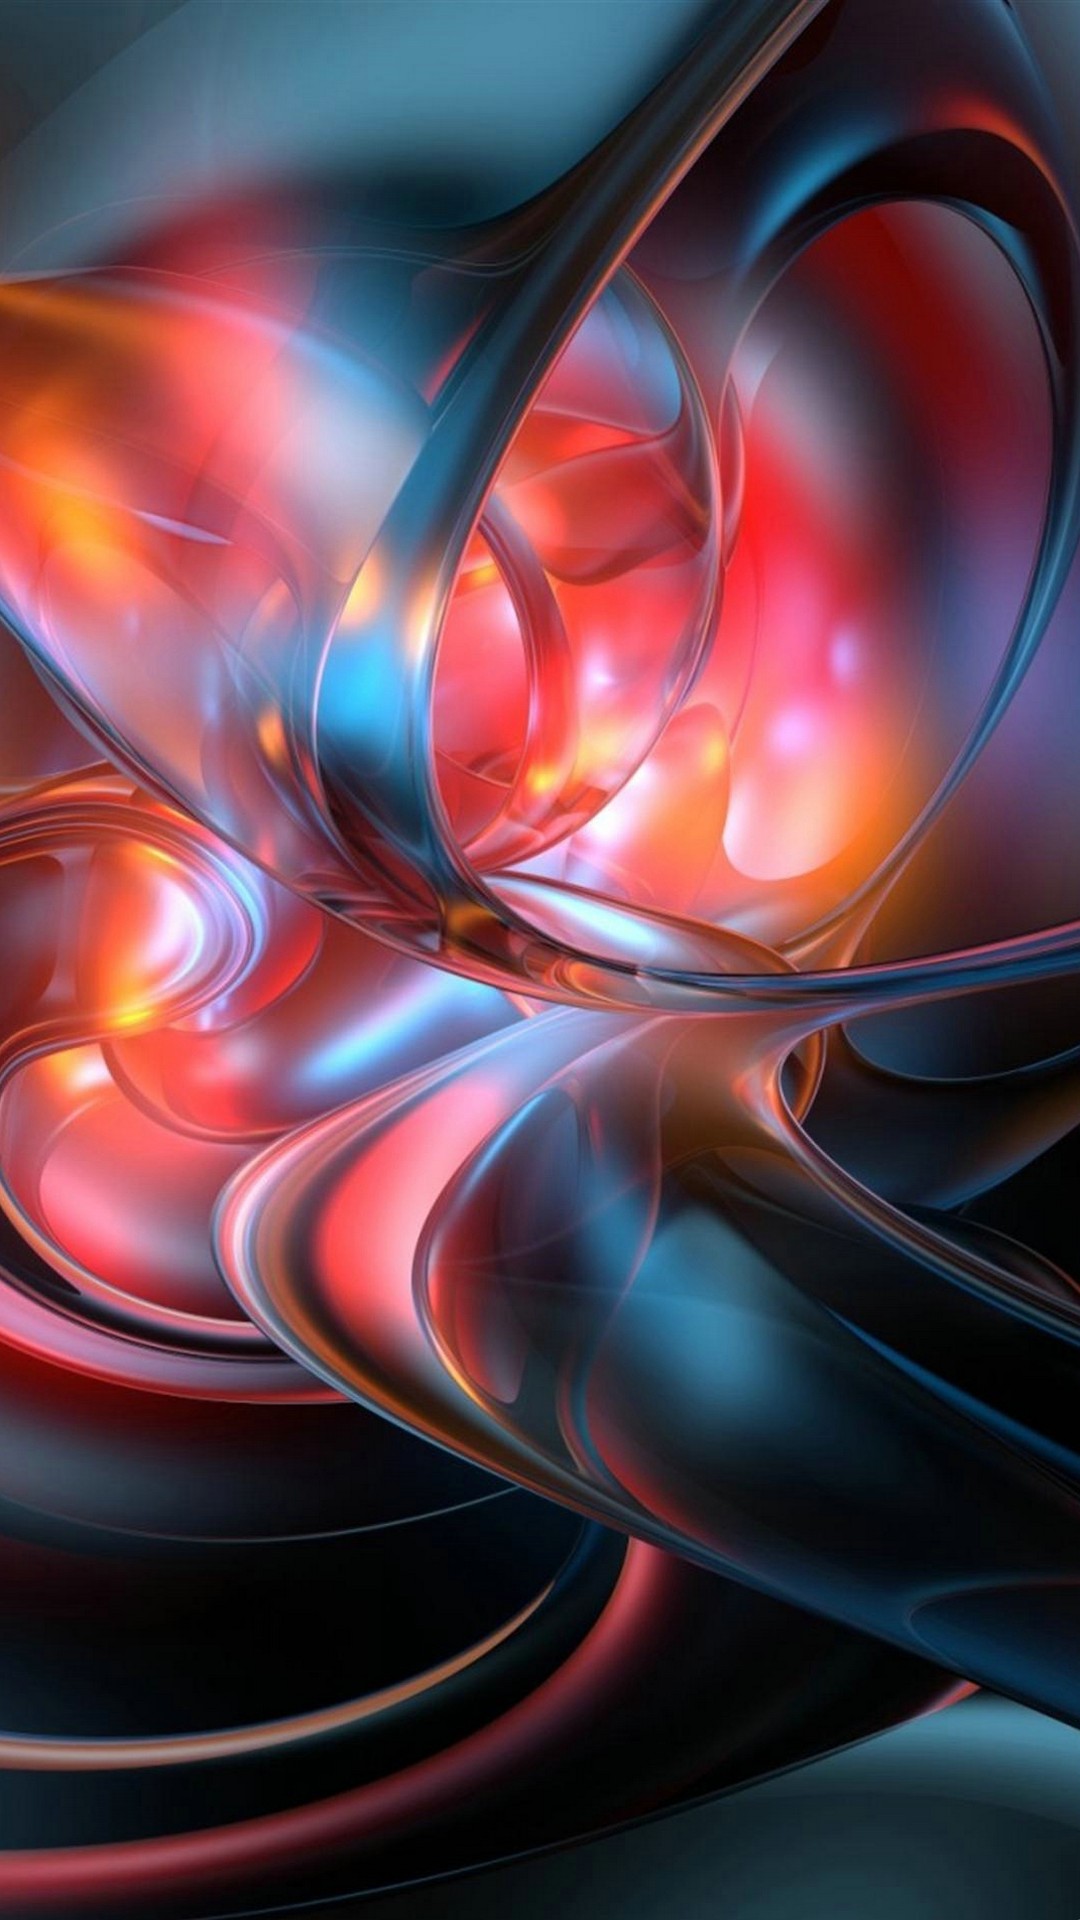 Android Wallpaper Abstract with HD resolution 1080x1920